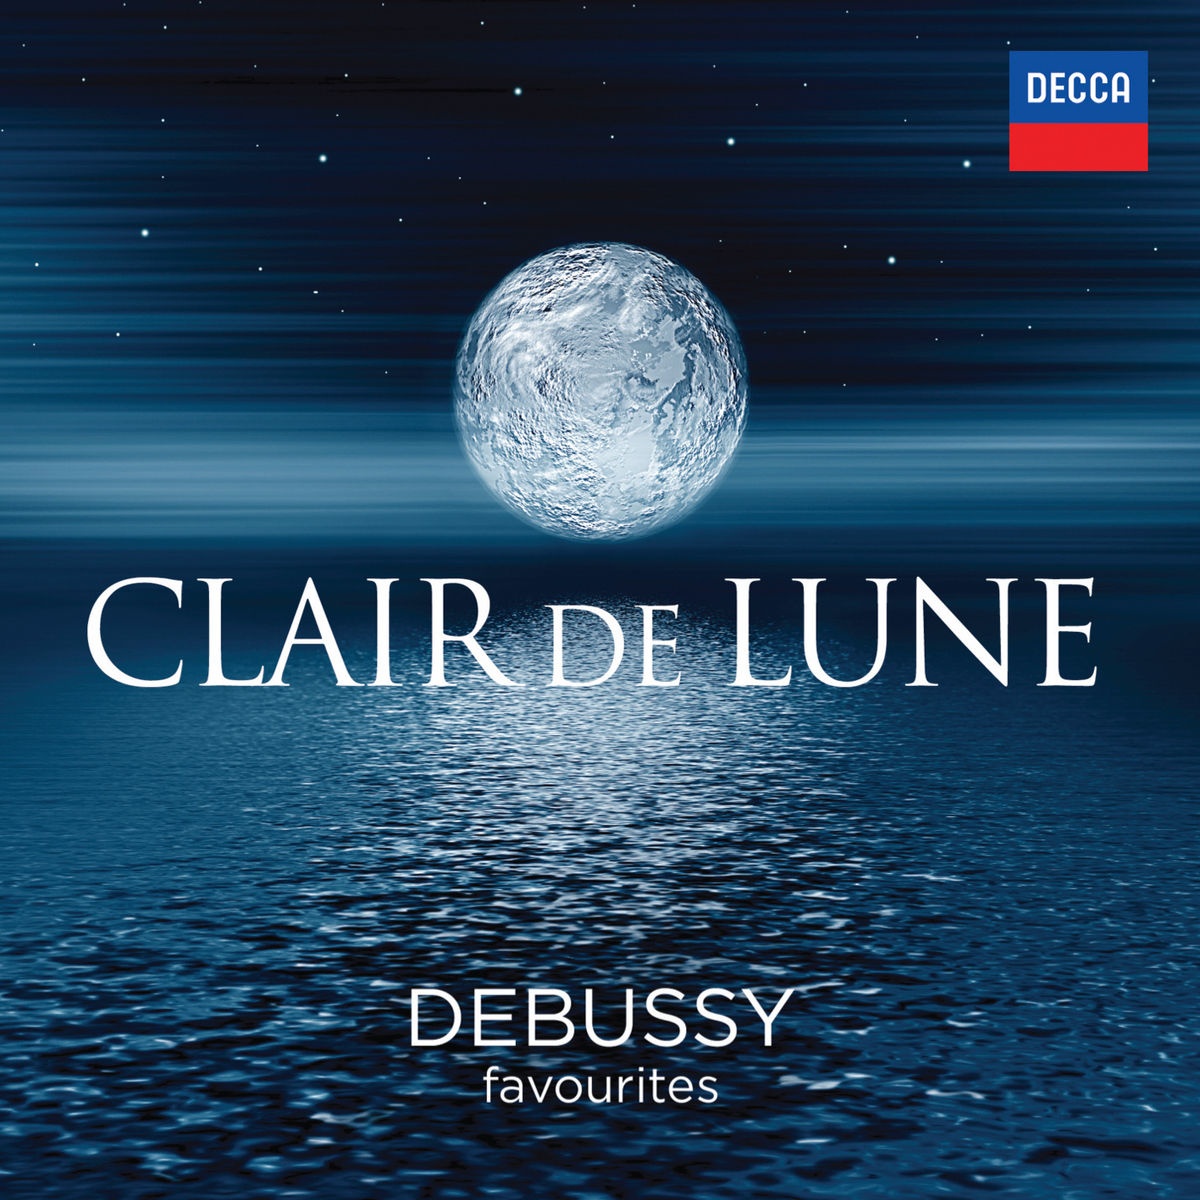 Debussy: String Quartet in G minor, Op.10 - 3. Andantino doucement expressif